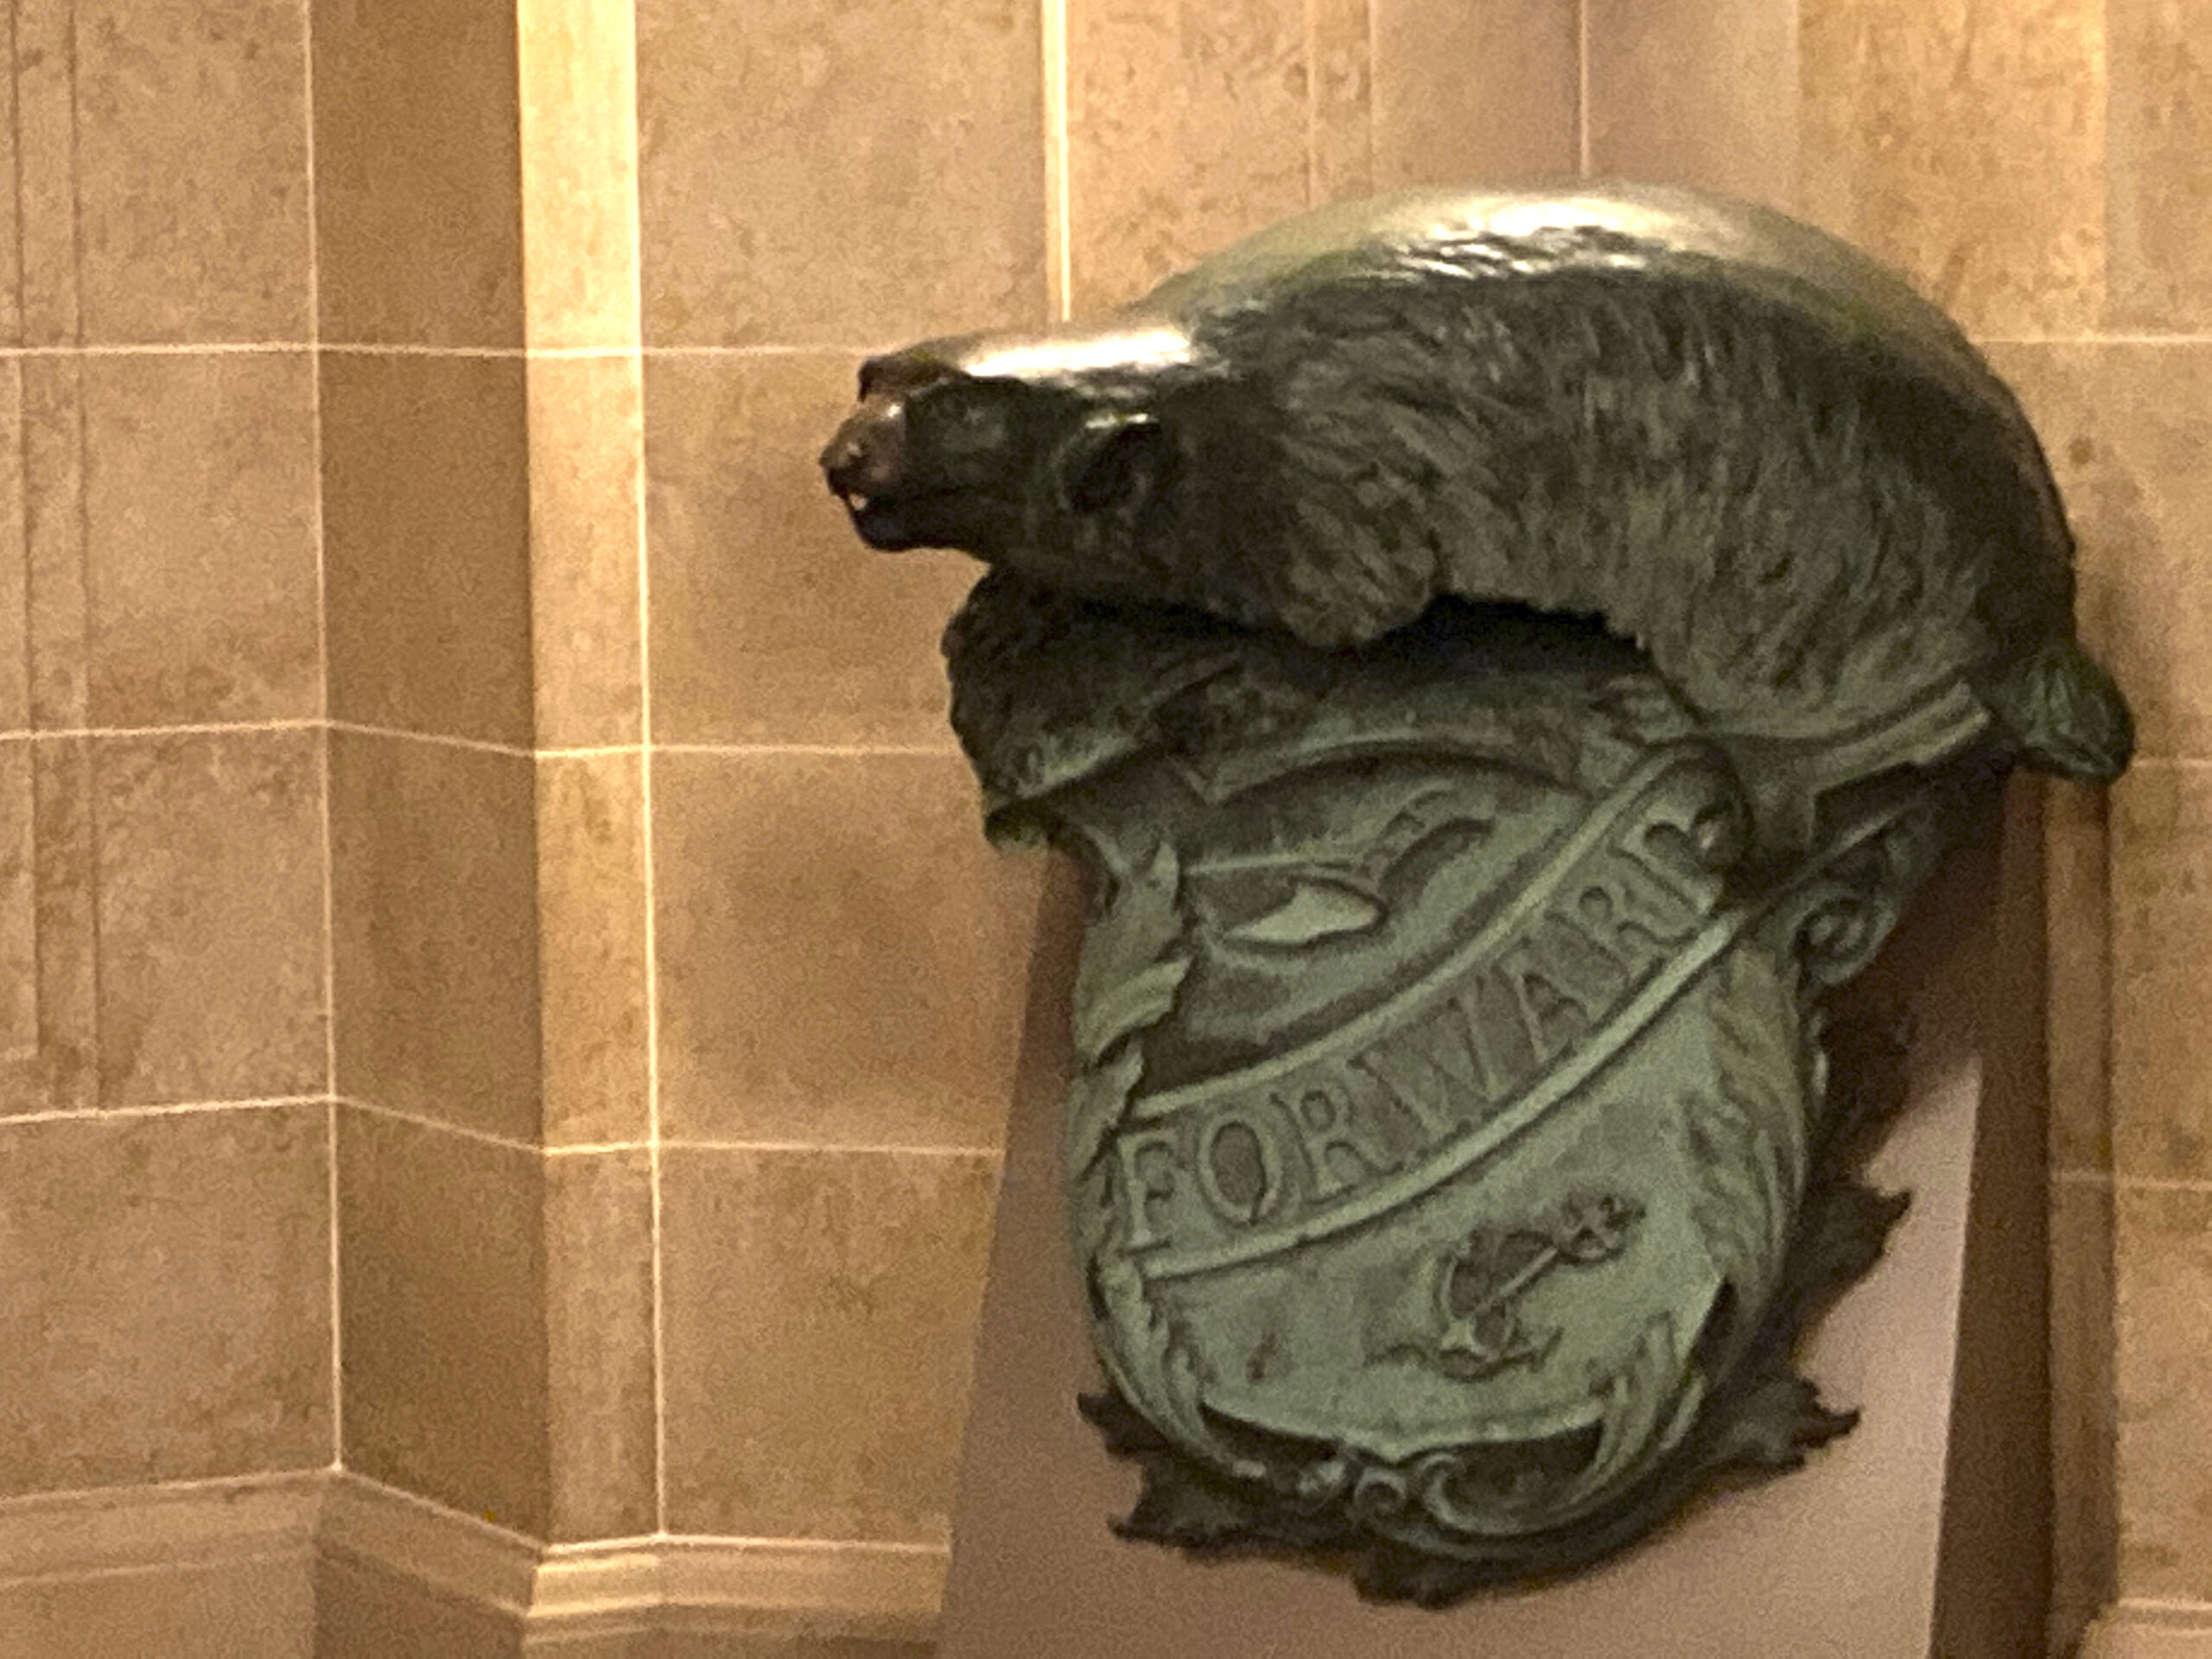 Badger and Shield statue